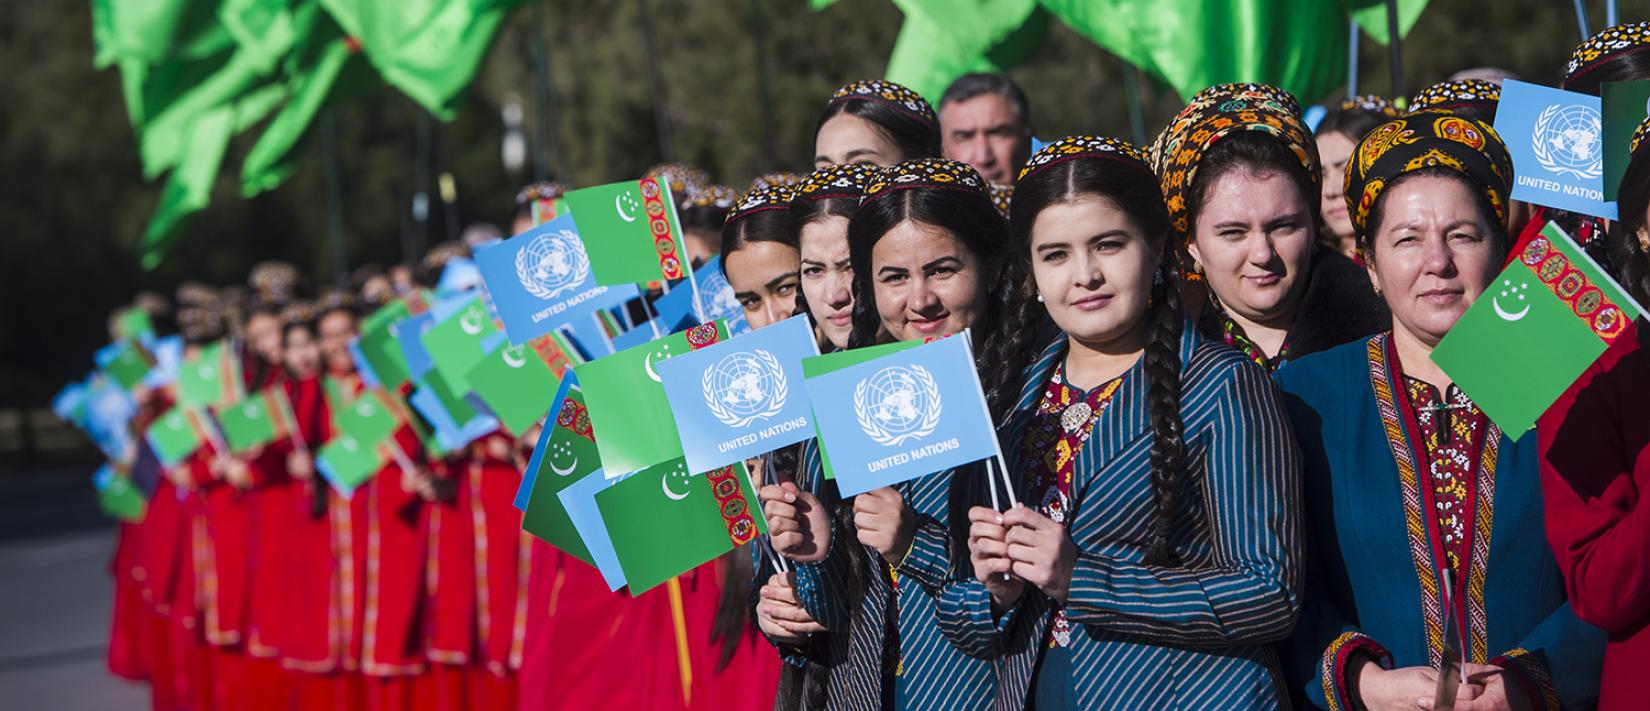 Young people celebrating the opening of the new United Nations House in Ashgabat, Turkmenistan.